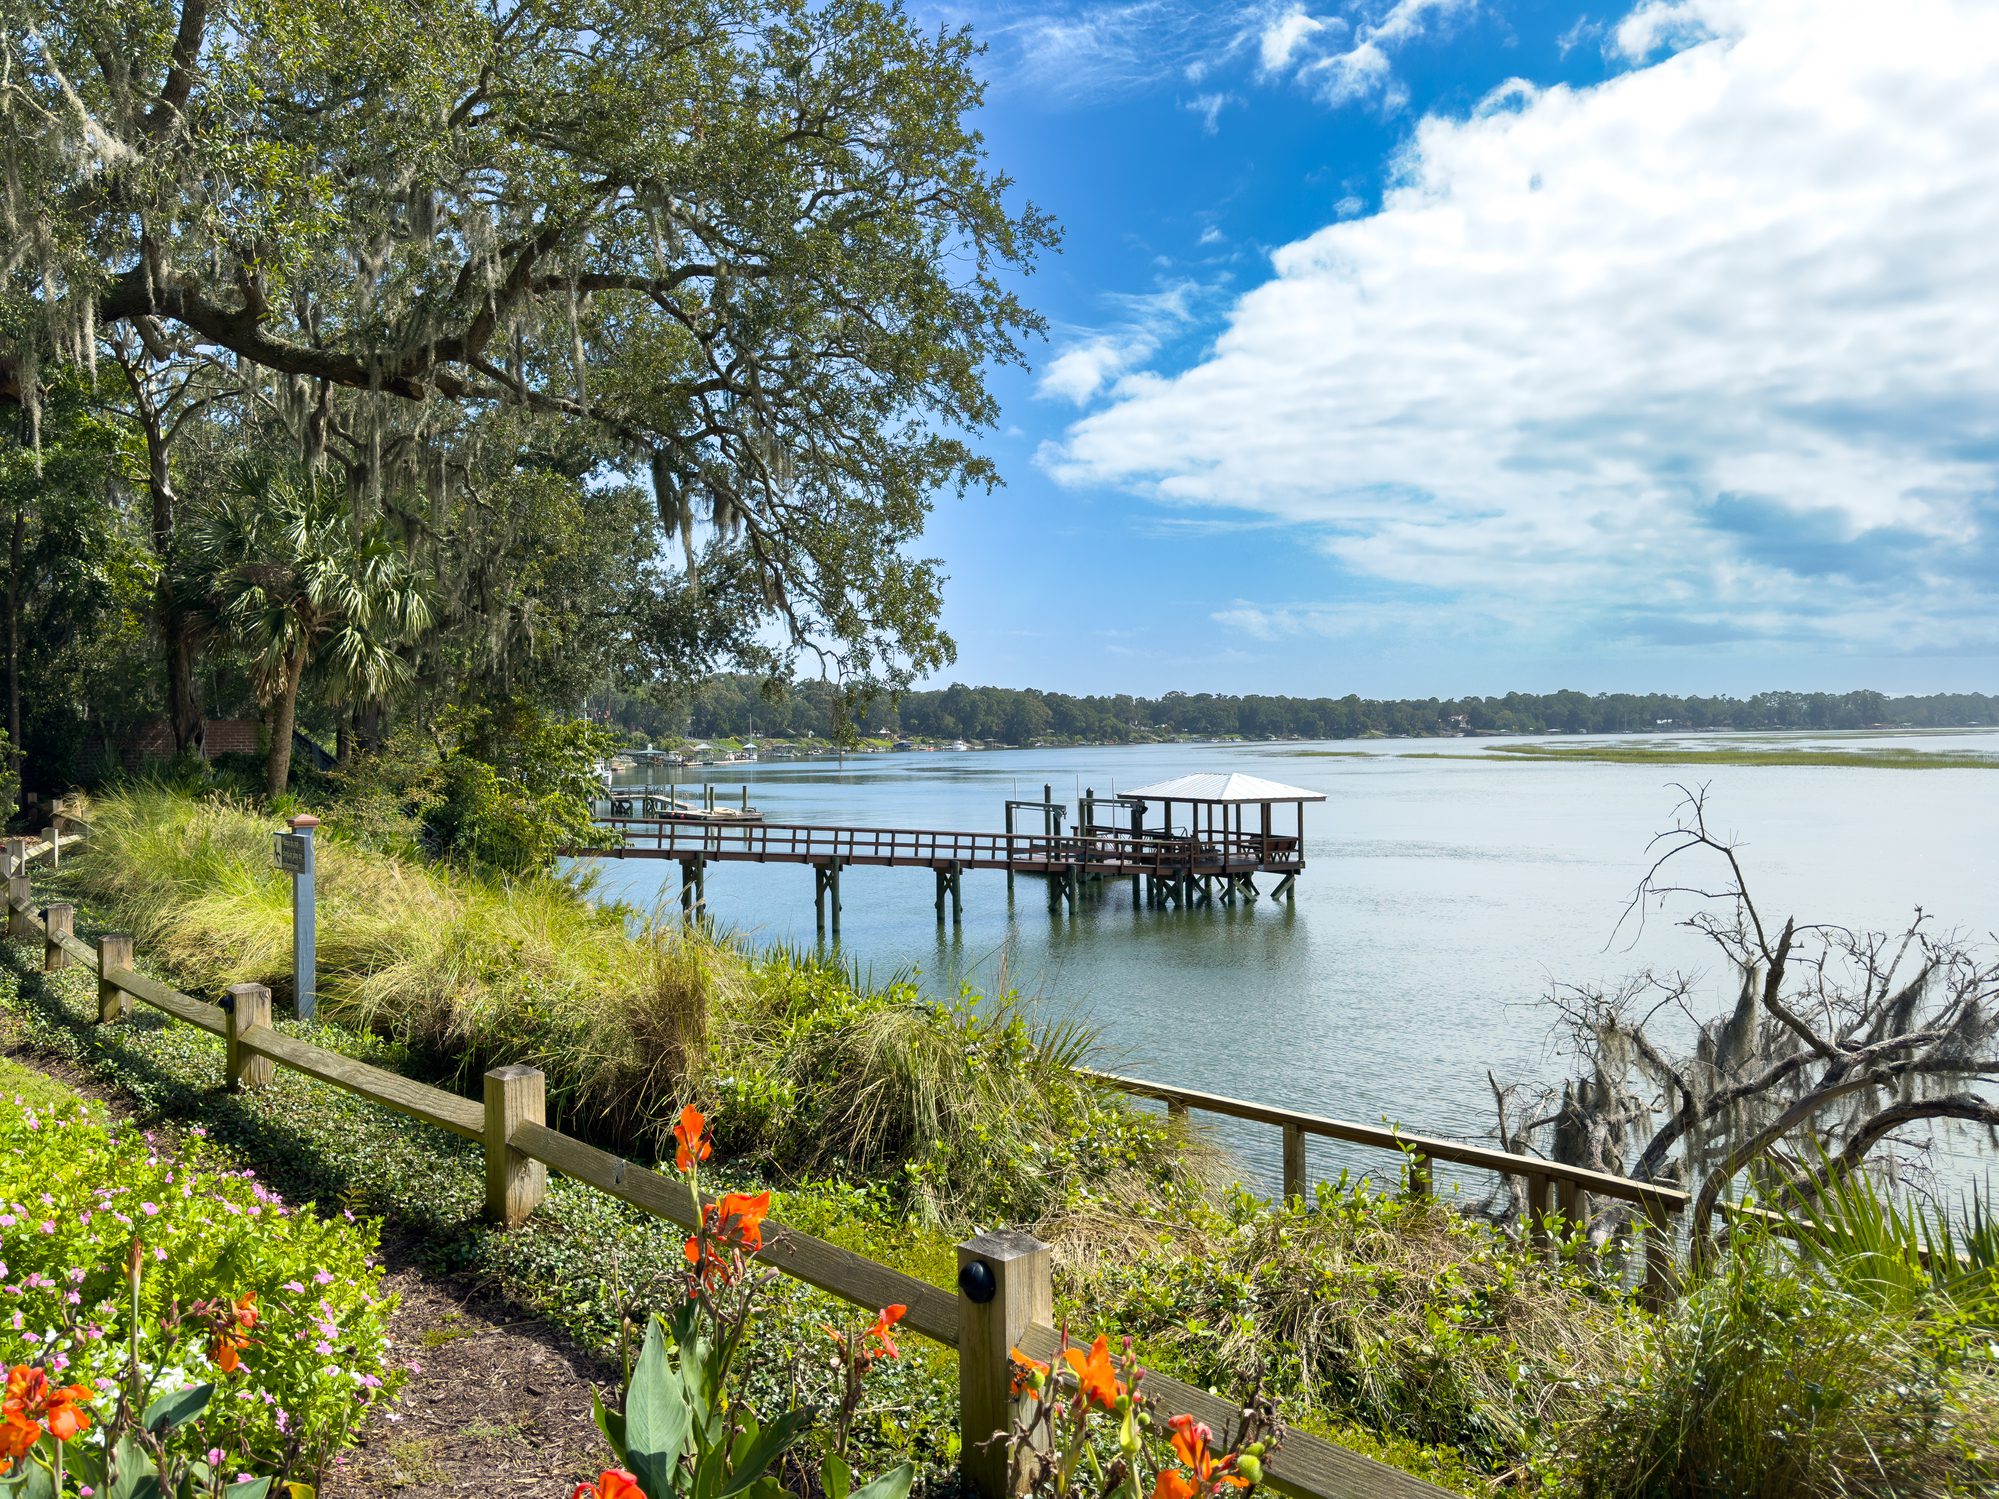 Idyllic view of the May River, Bluffton, SC